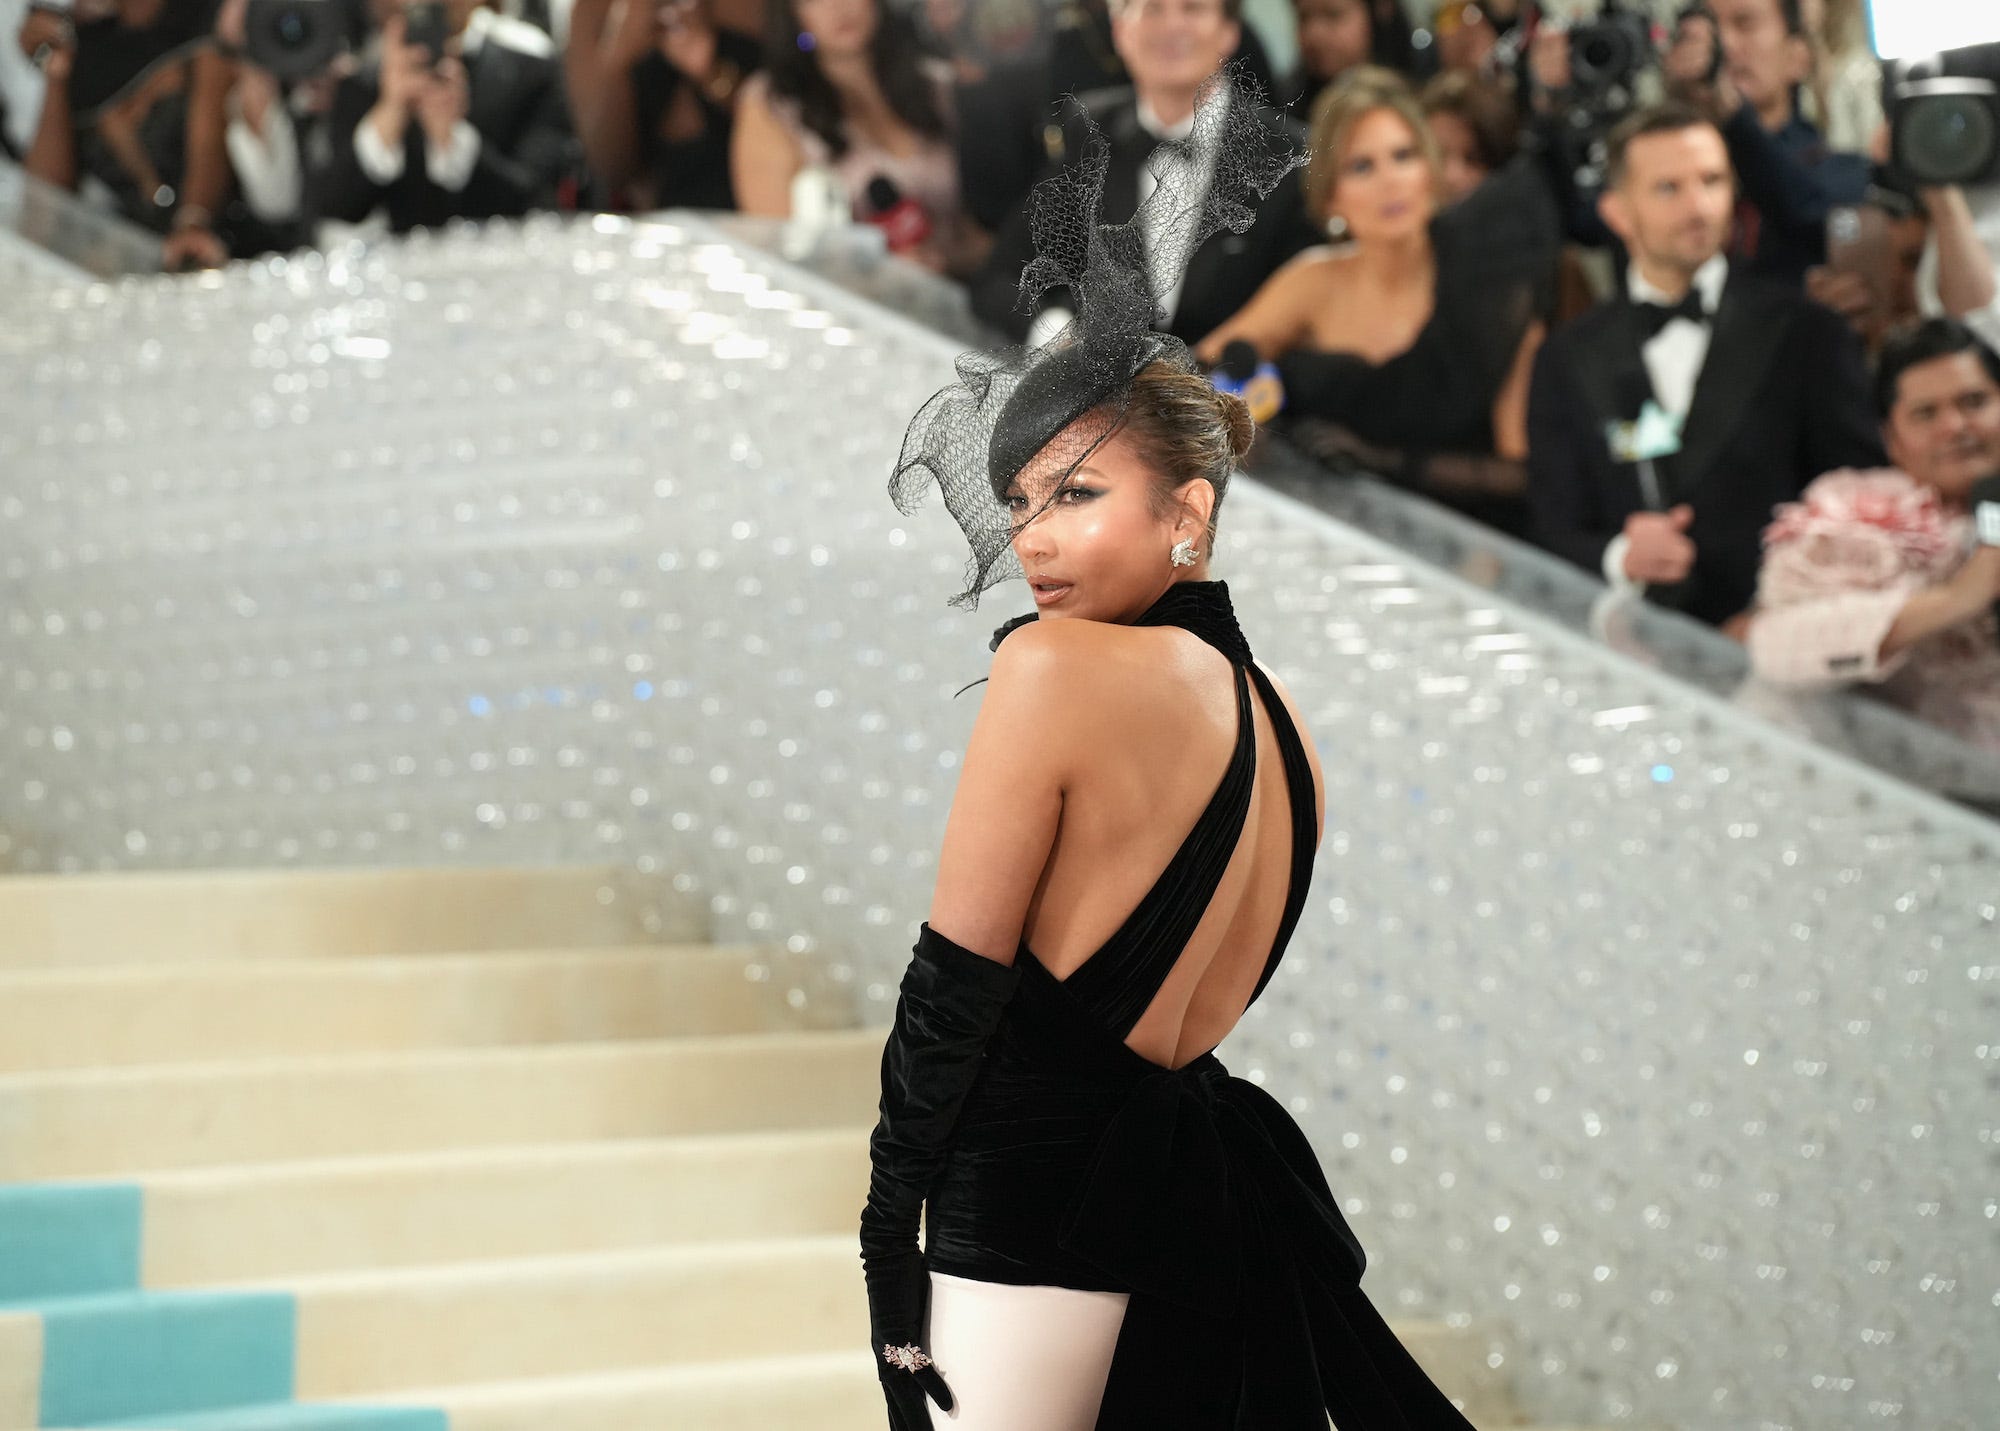 <p><span>Vogue will </span><a href="https://www.businessinsider.com/guides/streaming/where-to-watch-met-gala-live-stream-2024"><span>livestream the Met Gala</span></a><span> carpet on YouTube, TikTok, and its website, with co-hosts including Gwendoline Christine, La La Anthony, and Ashley Graham.</span></p><p><span>E! will also broadcast TV coverage of red-carpet arrivals, with Ross Matthew doing interviews on-site. </span><a class="live-blog-button" href="https://www.businessinsider.com/guides/streaming/where-to-watch-met-gala-live-stream-2024">Read full story</a></p>